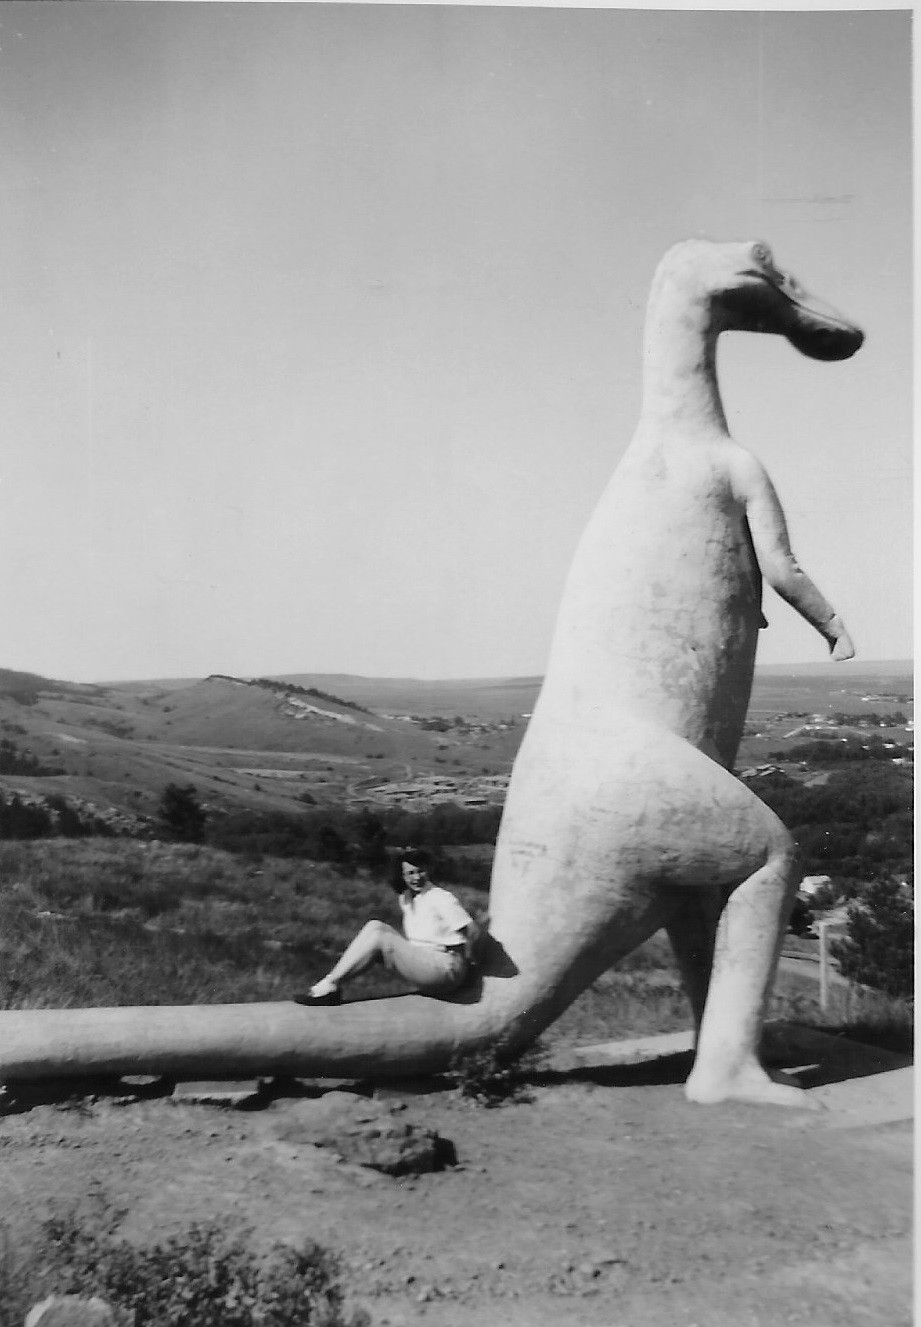 My great-grandma Audrey on a dinasour in the dinaour park in Rapid City, SD in the 1940s. The dinasour park was made in 1936. Our family visited in the summer of 2022.